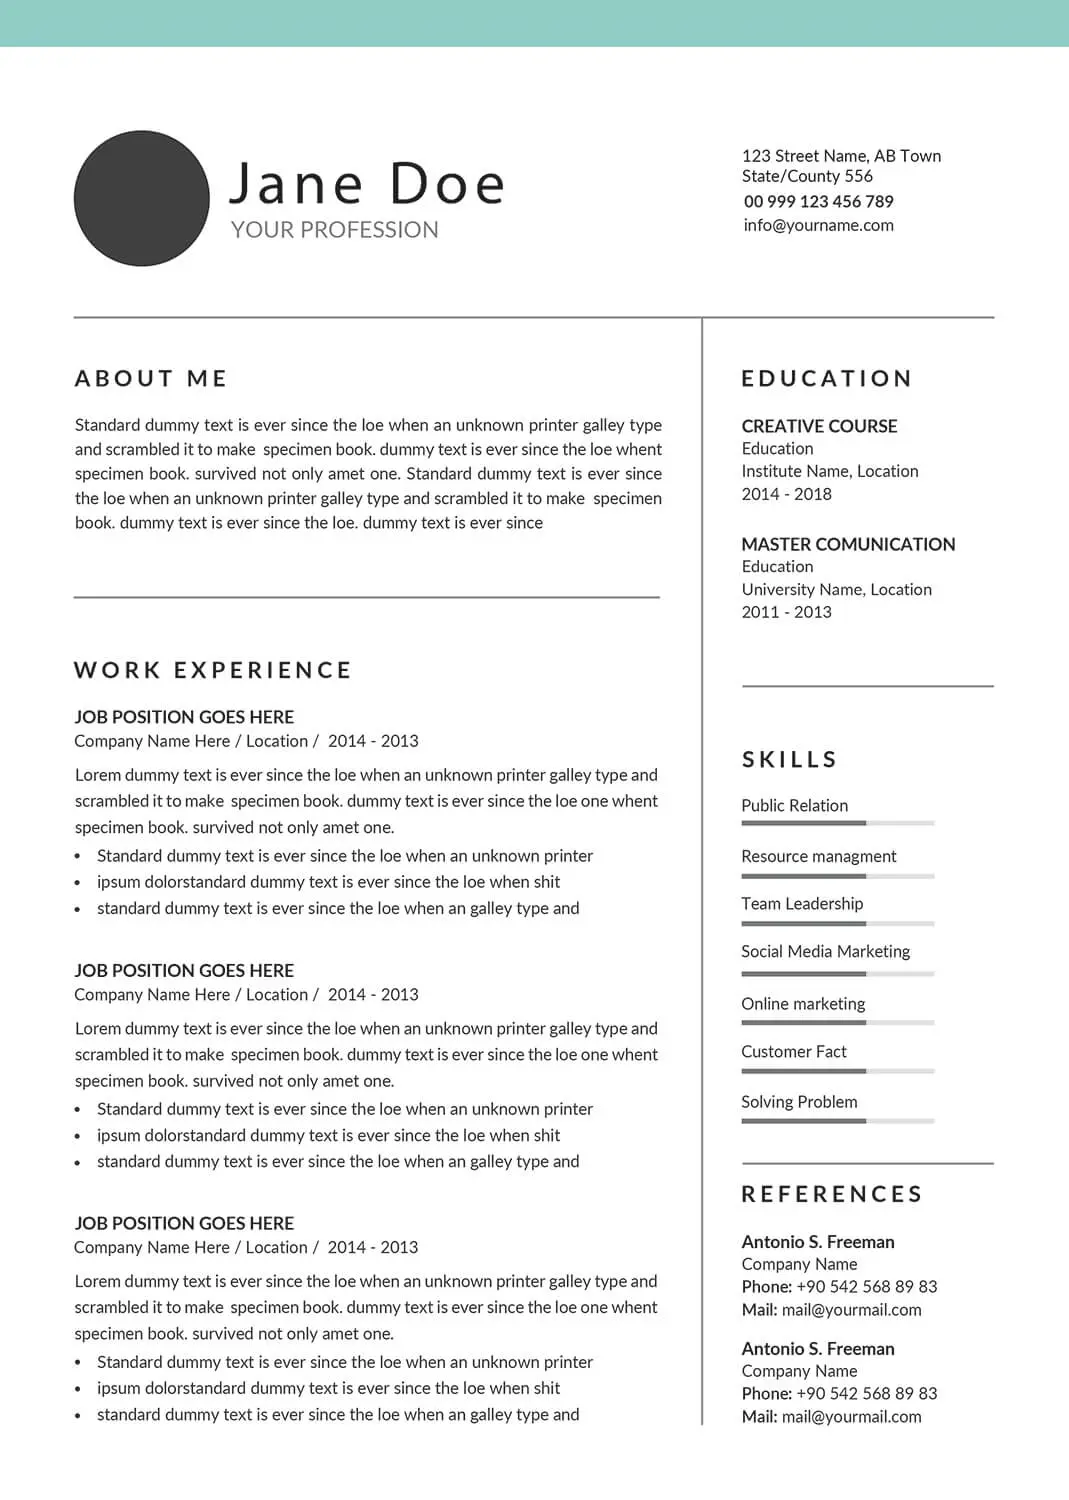 Best resume format for accounting
assistants